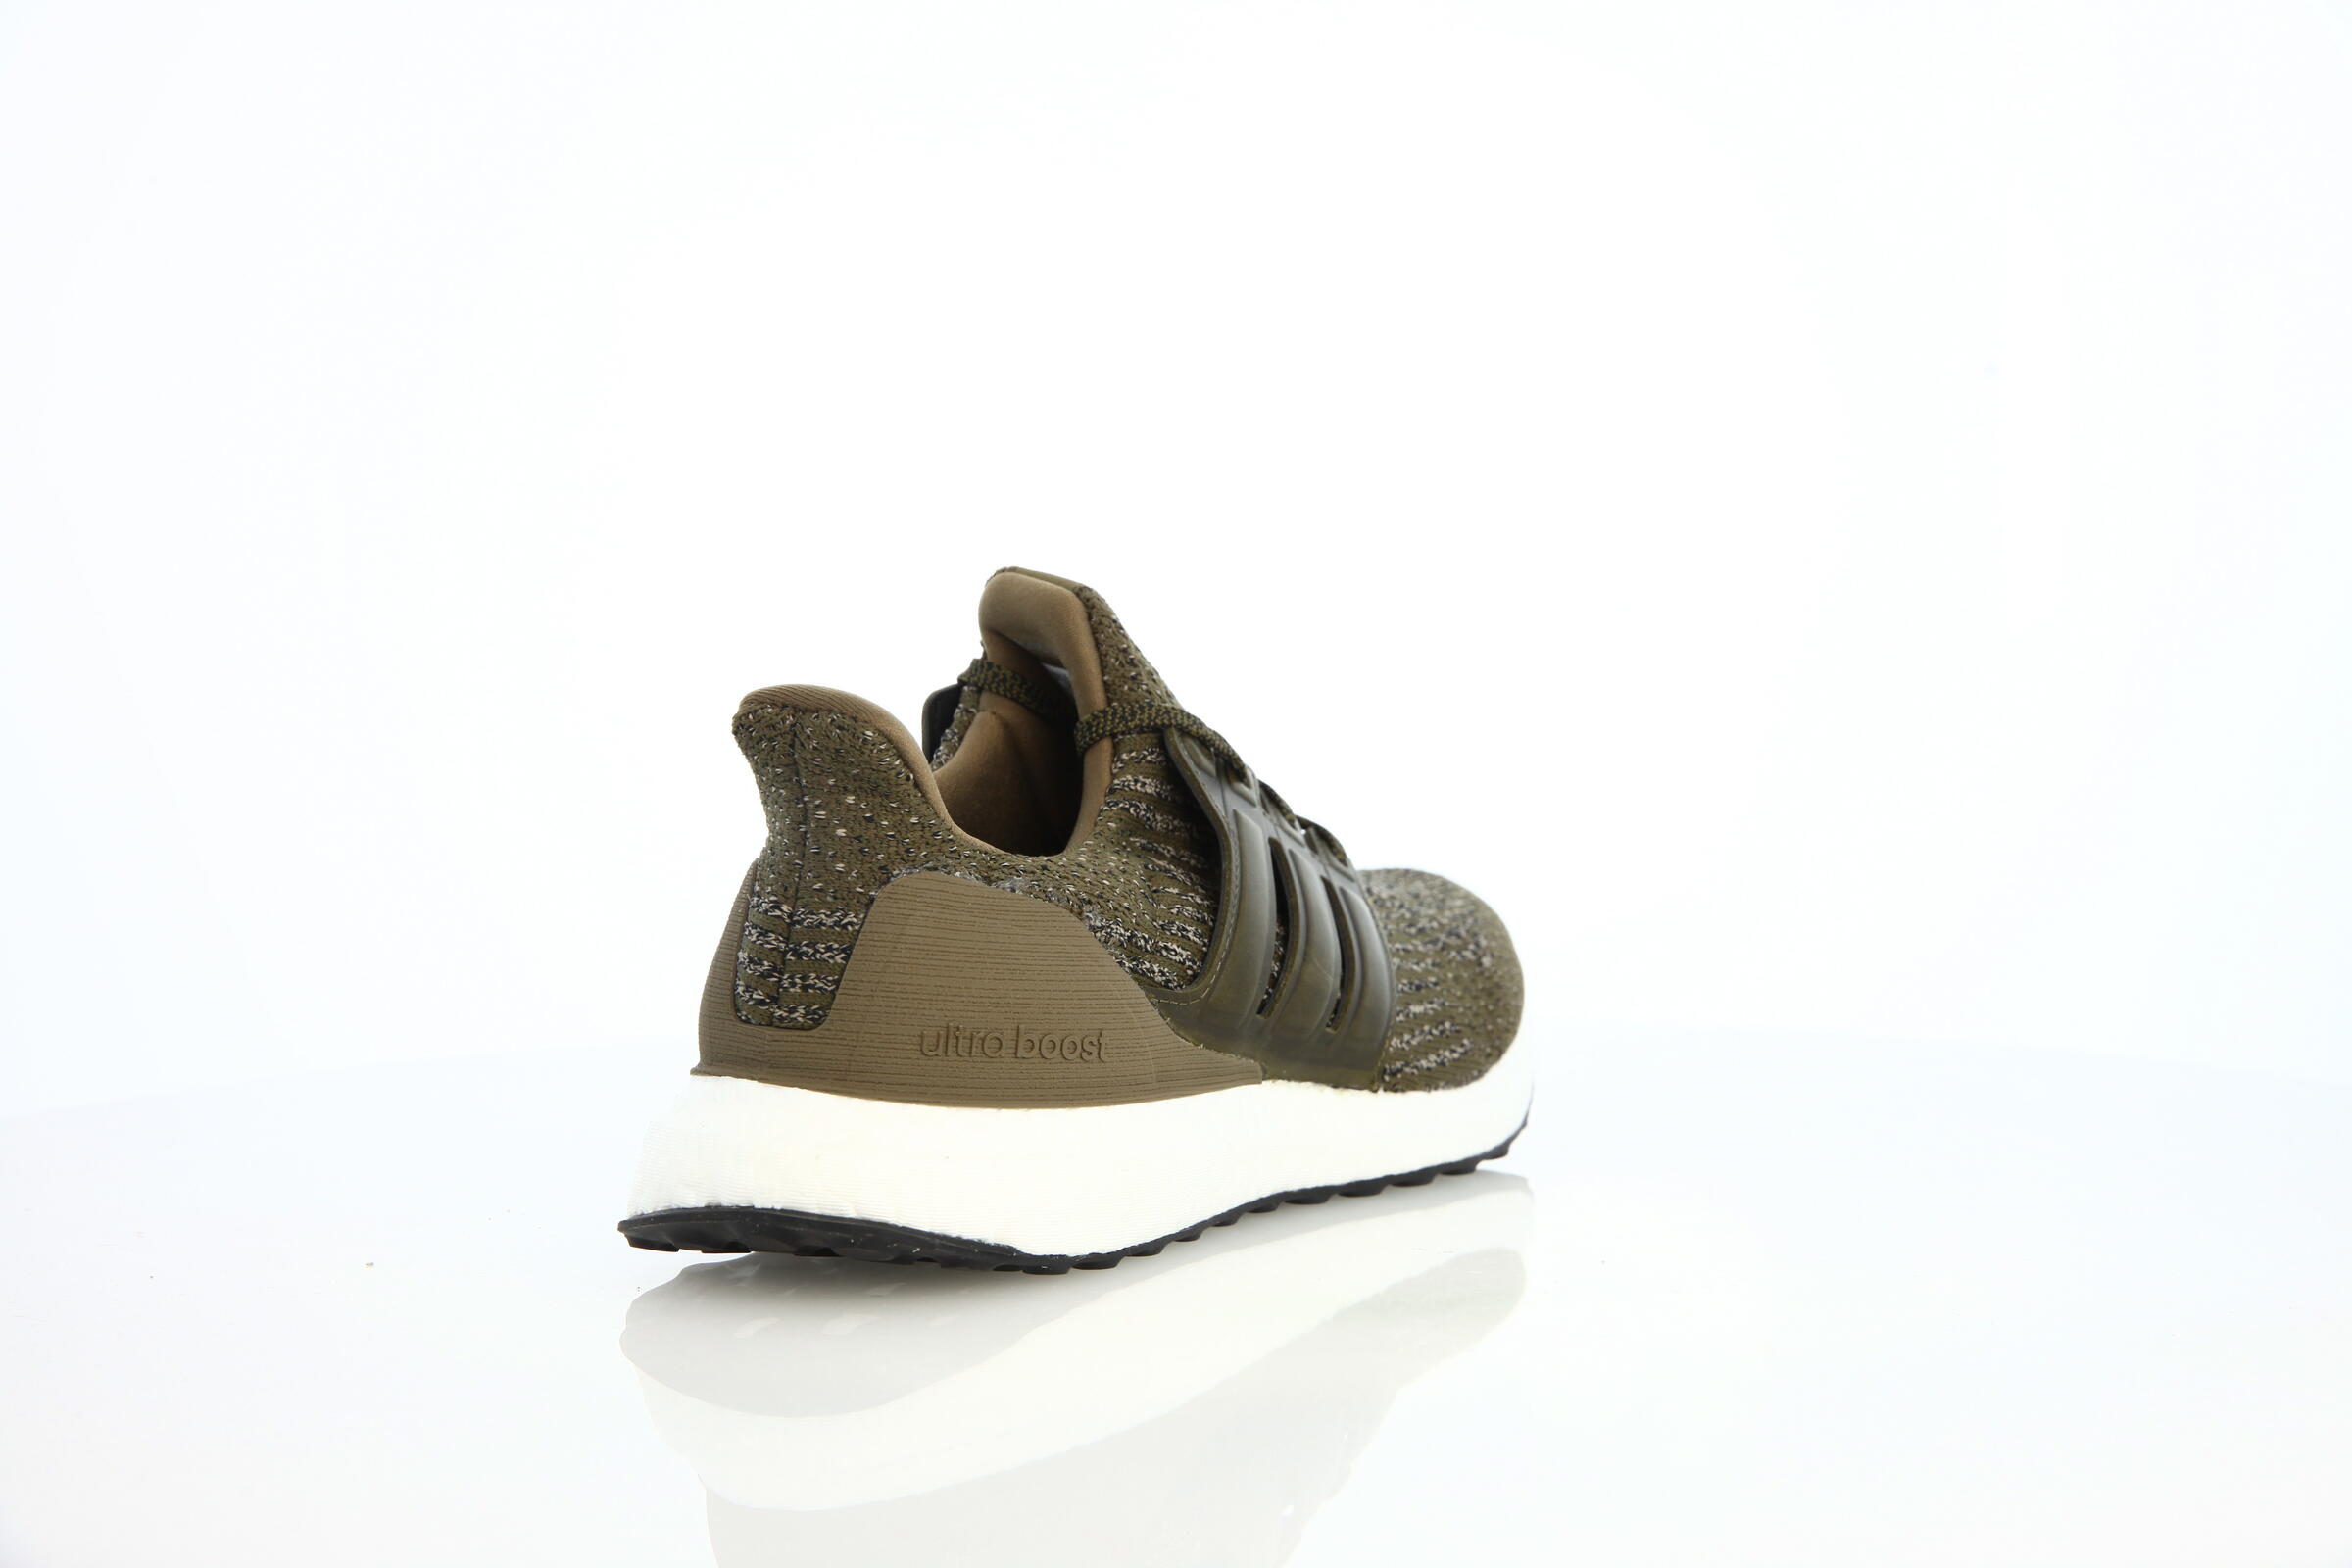 adidas Performance UltraBoost 3.0 "Trace Olive"